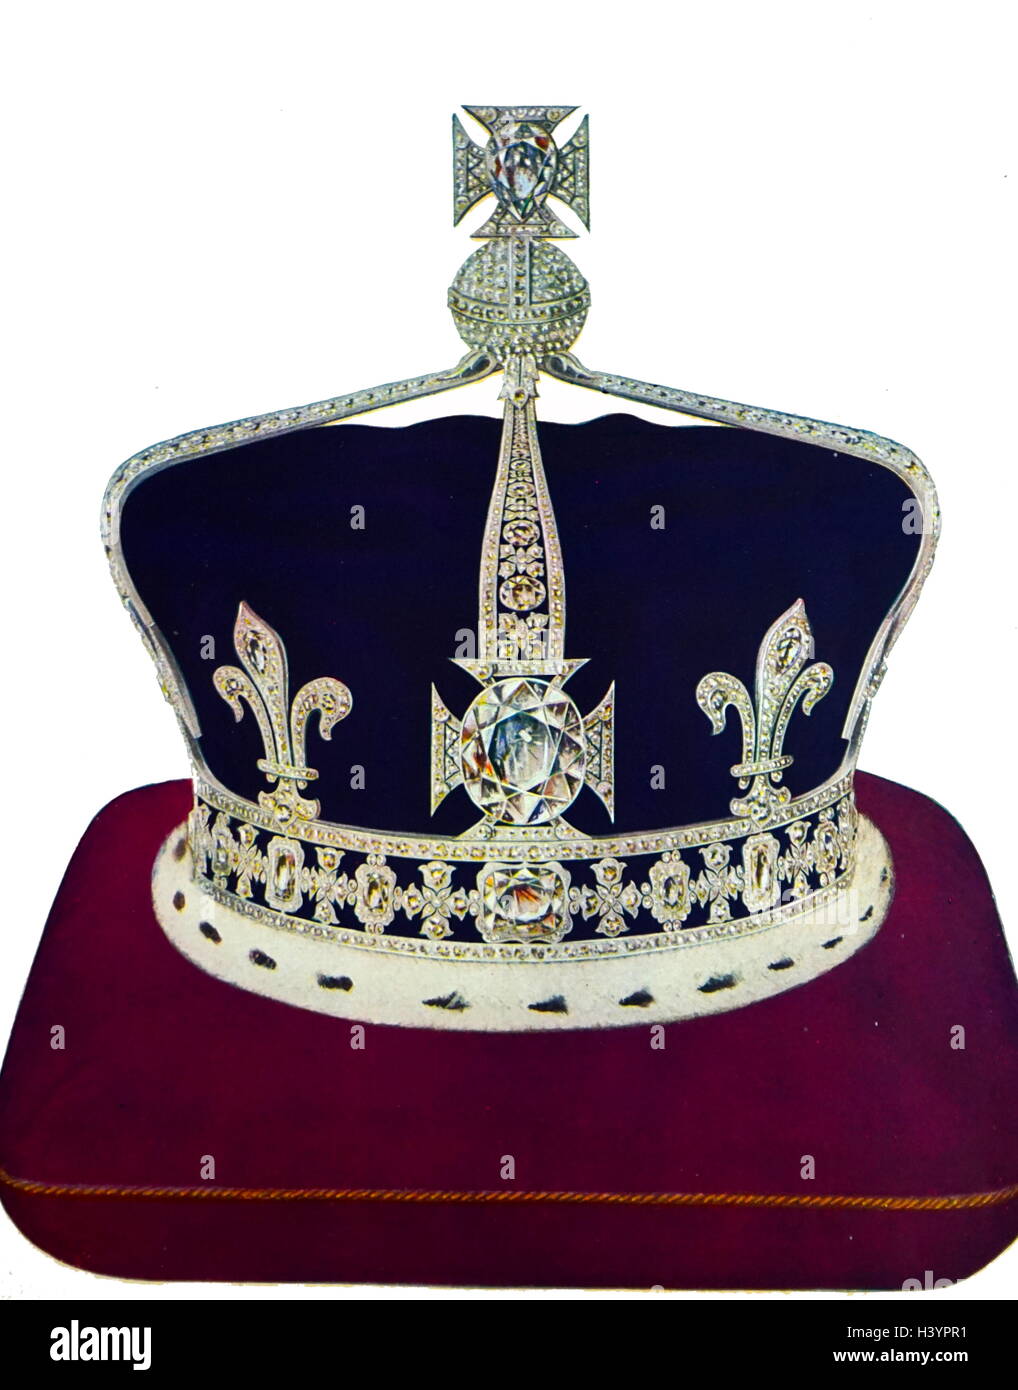 Queen Elizabeth’s crown, made by Garrard, was the first to be mounted in platinum. it includes a circlet used by Queen Victoria and is emblazoned by the Koh-I-Noor diamond. Crown of Queen Elizabeth The Queen Mother, also known as The Queen Mother's Crown, is the crown made for Queen Elizabeth, the wife of King George VI, to wear at their coronation in 1937 and State Openings of Parliament during her husband's reign. Stock Photo